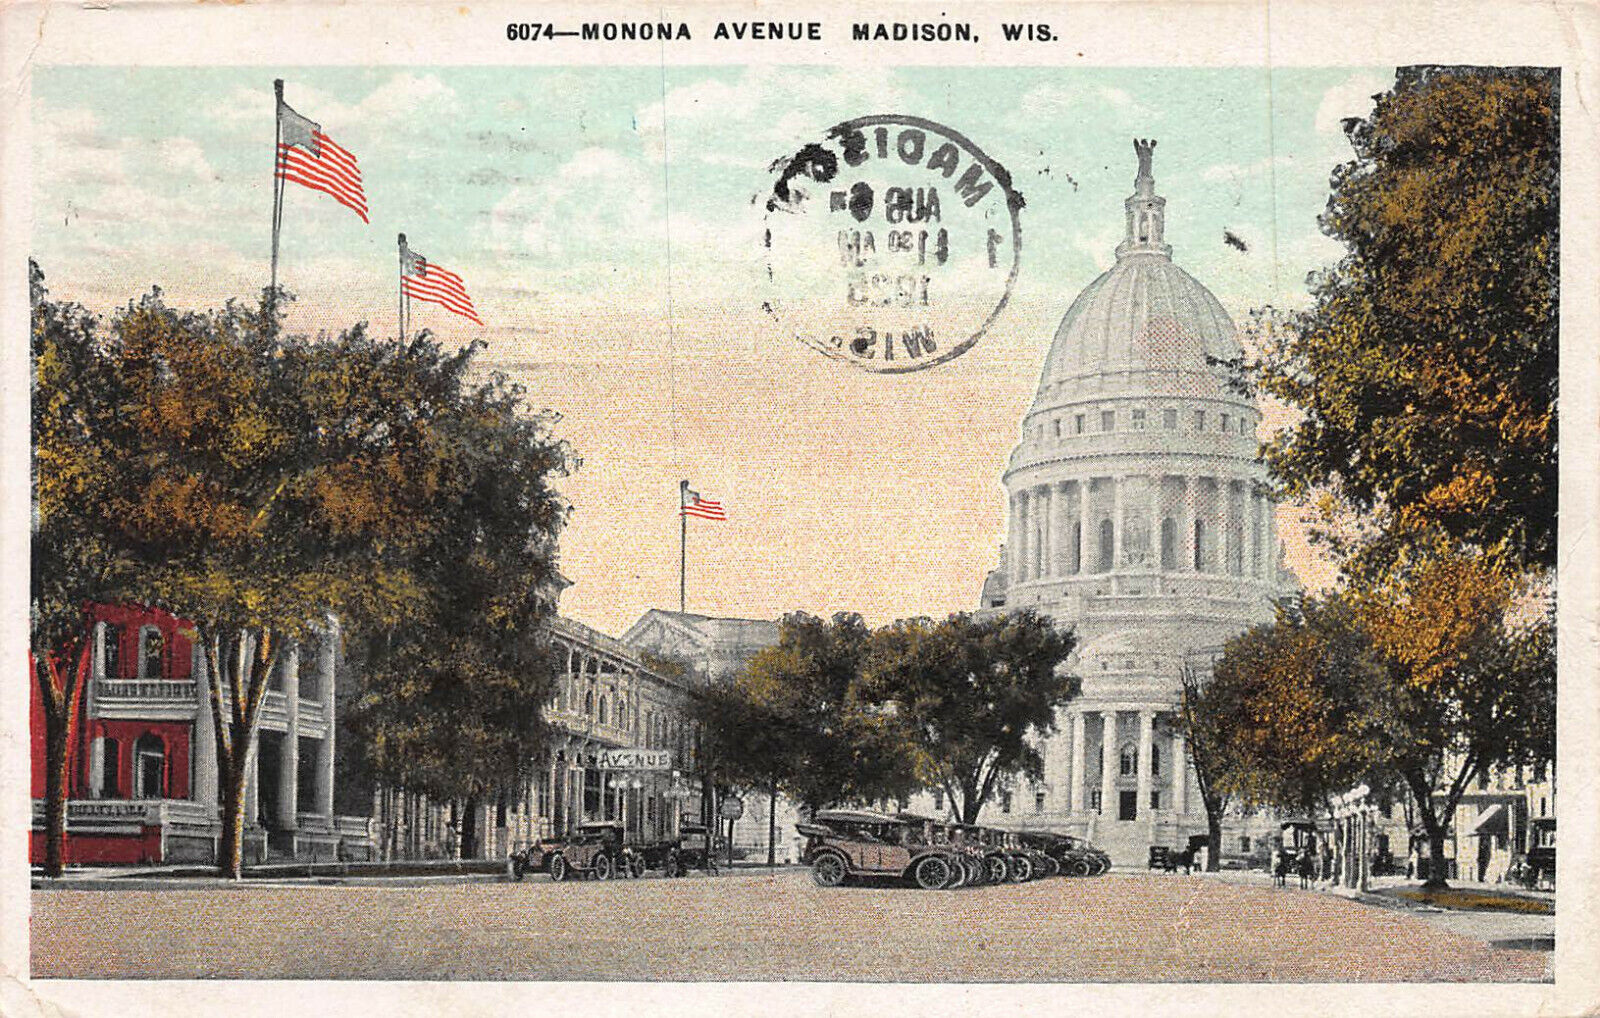 Monona Avenue, Madison, Wisconsin, Early Postcard, Used in 1925.